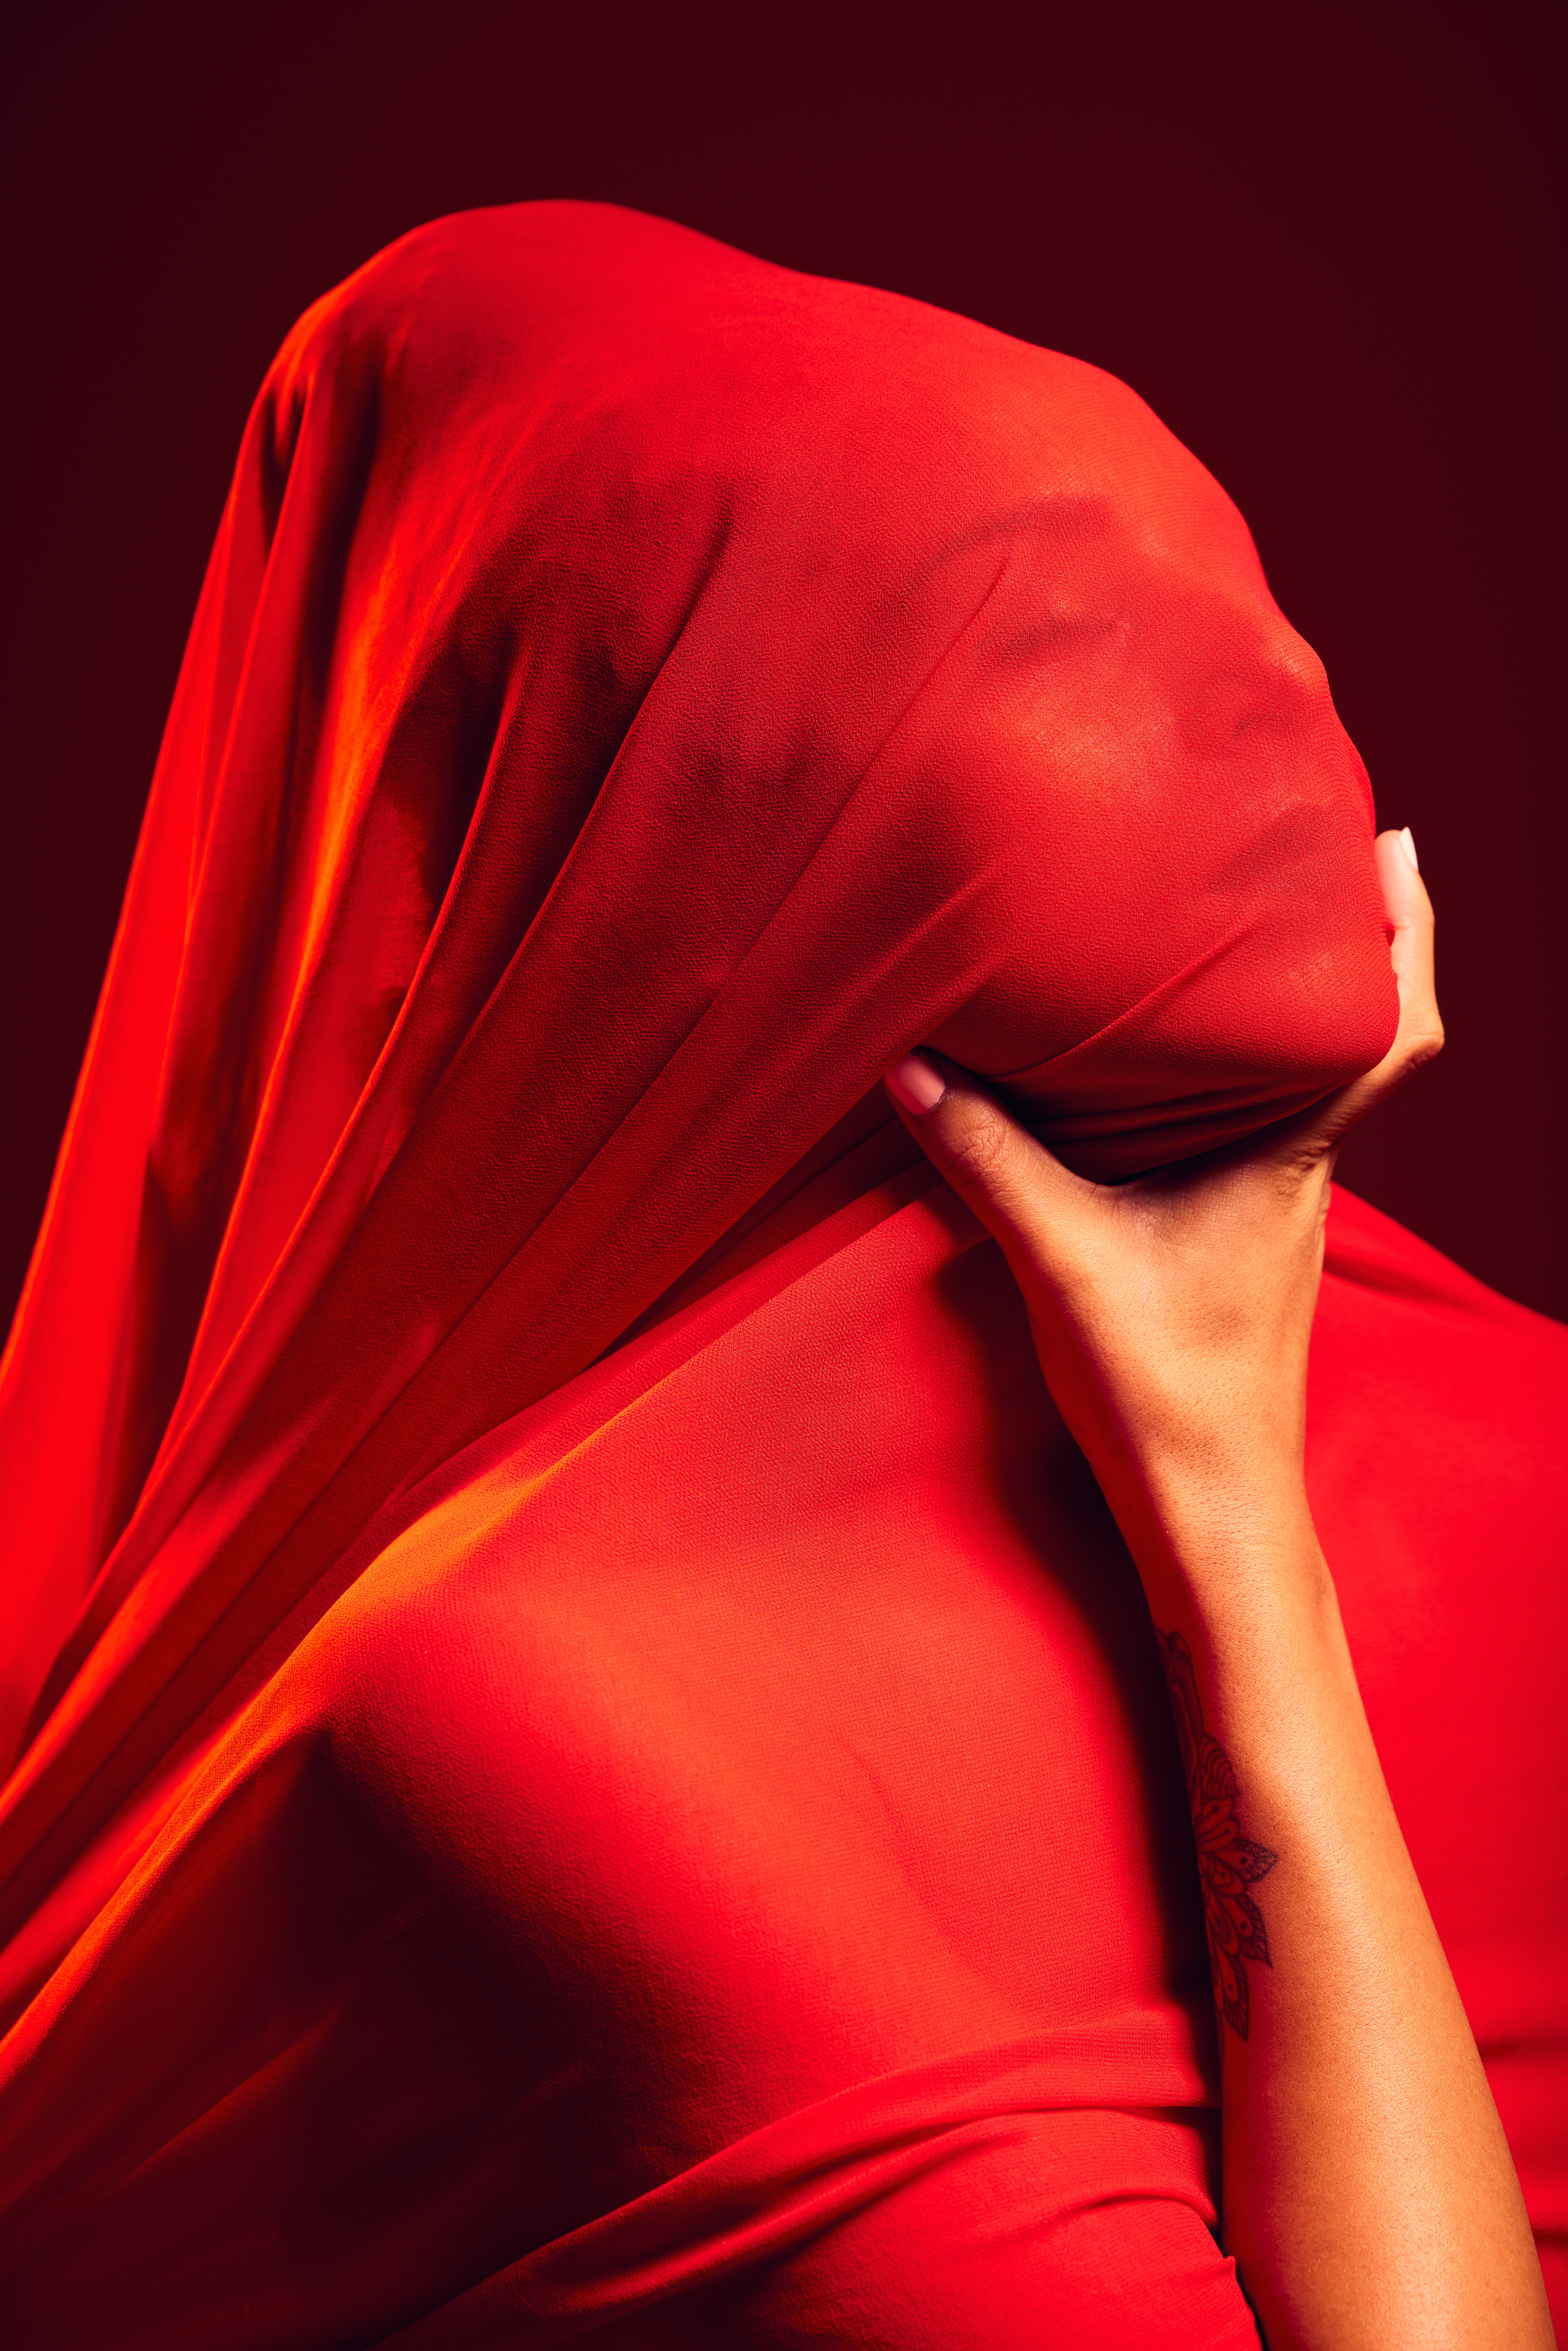 A red fabric-covered person symbolizing red flags is gripped by a hand, representing addiction, in a metaphorical representation of the blog's theme on understanding addiction patterns.